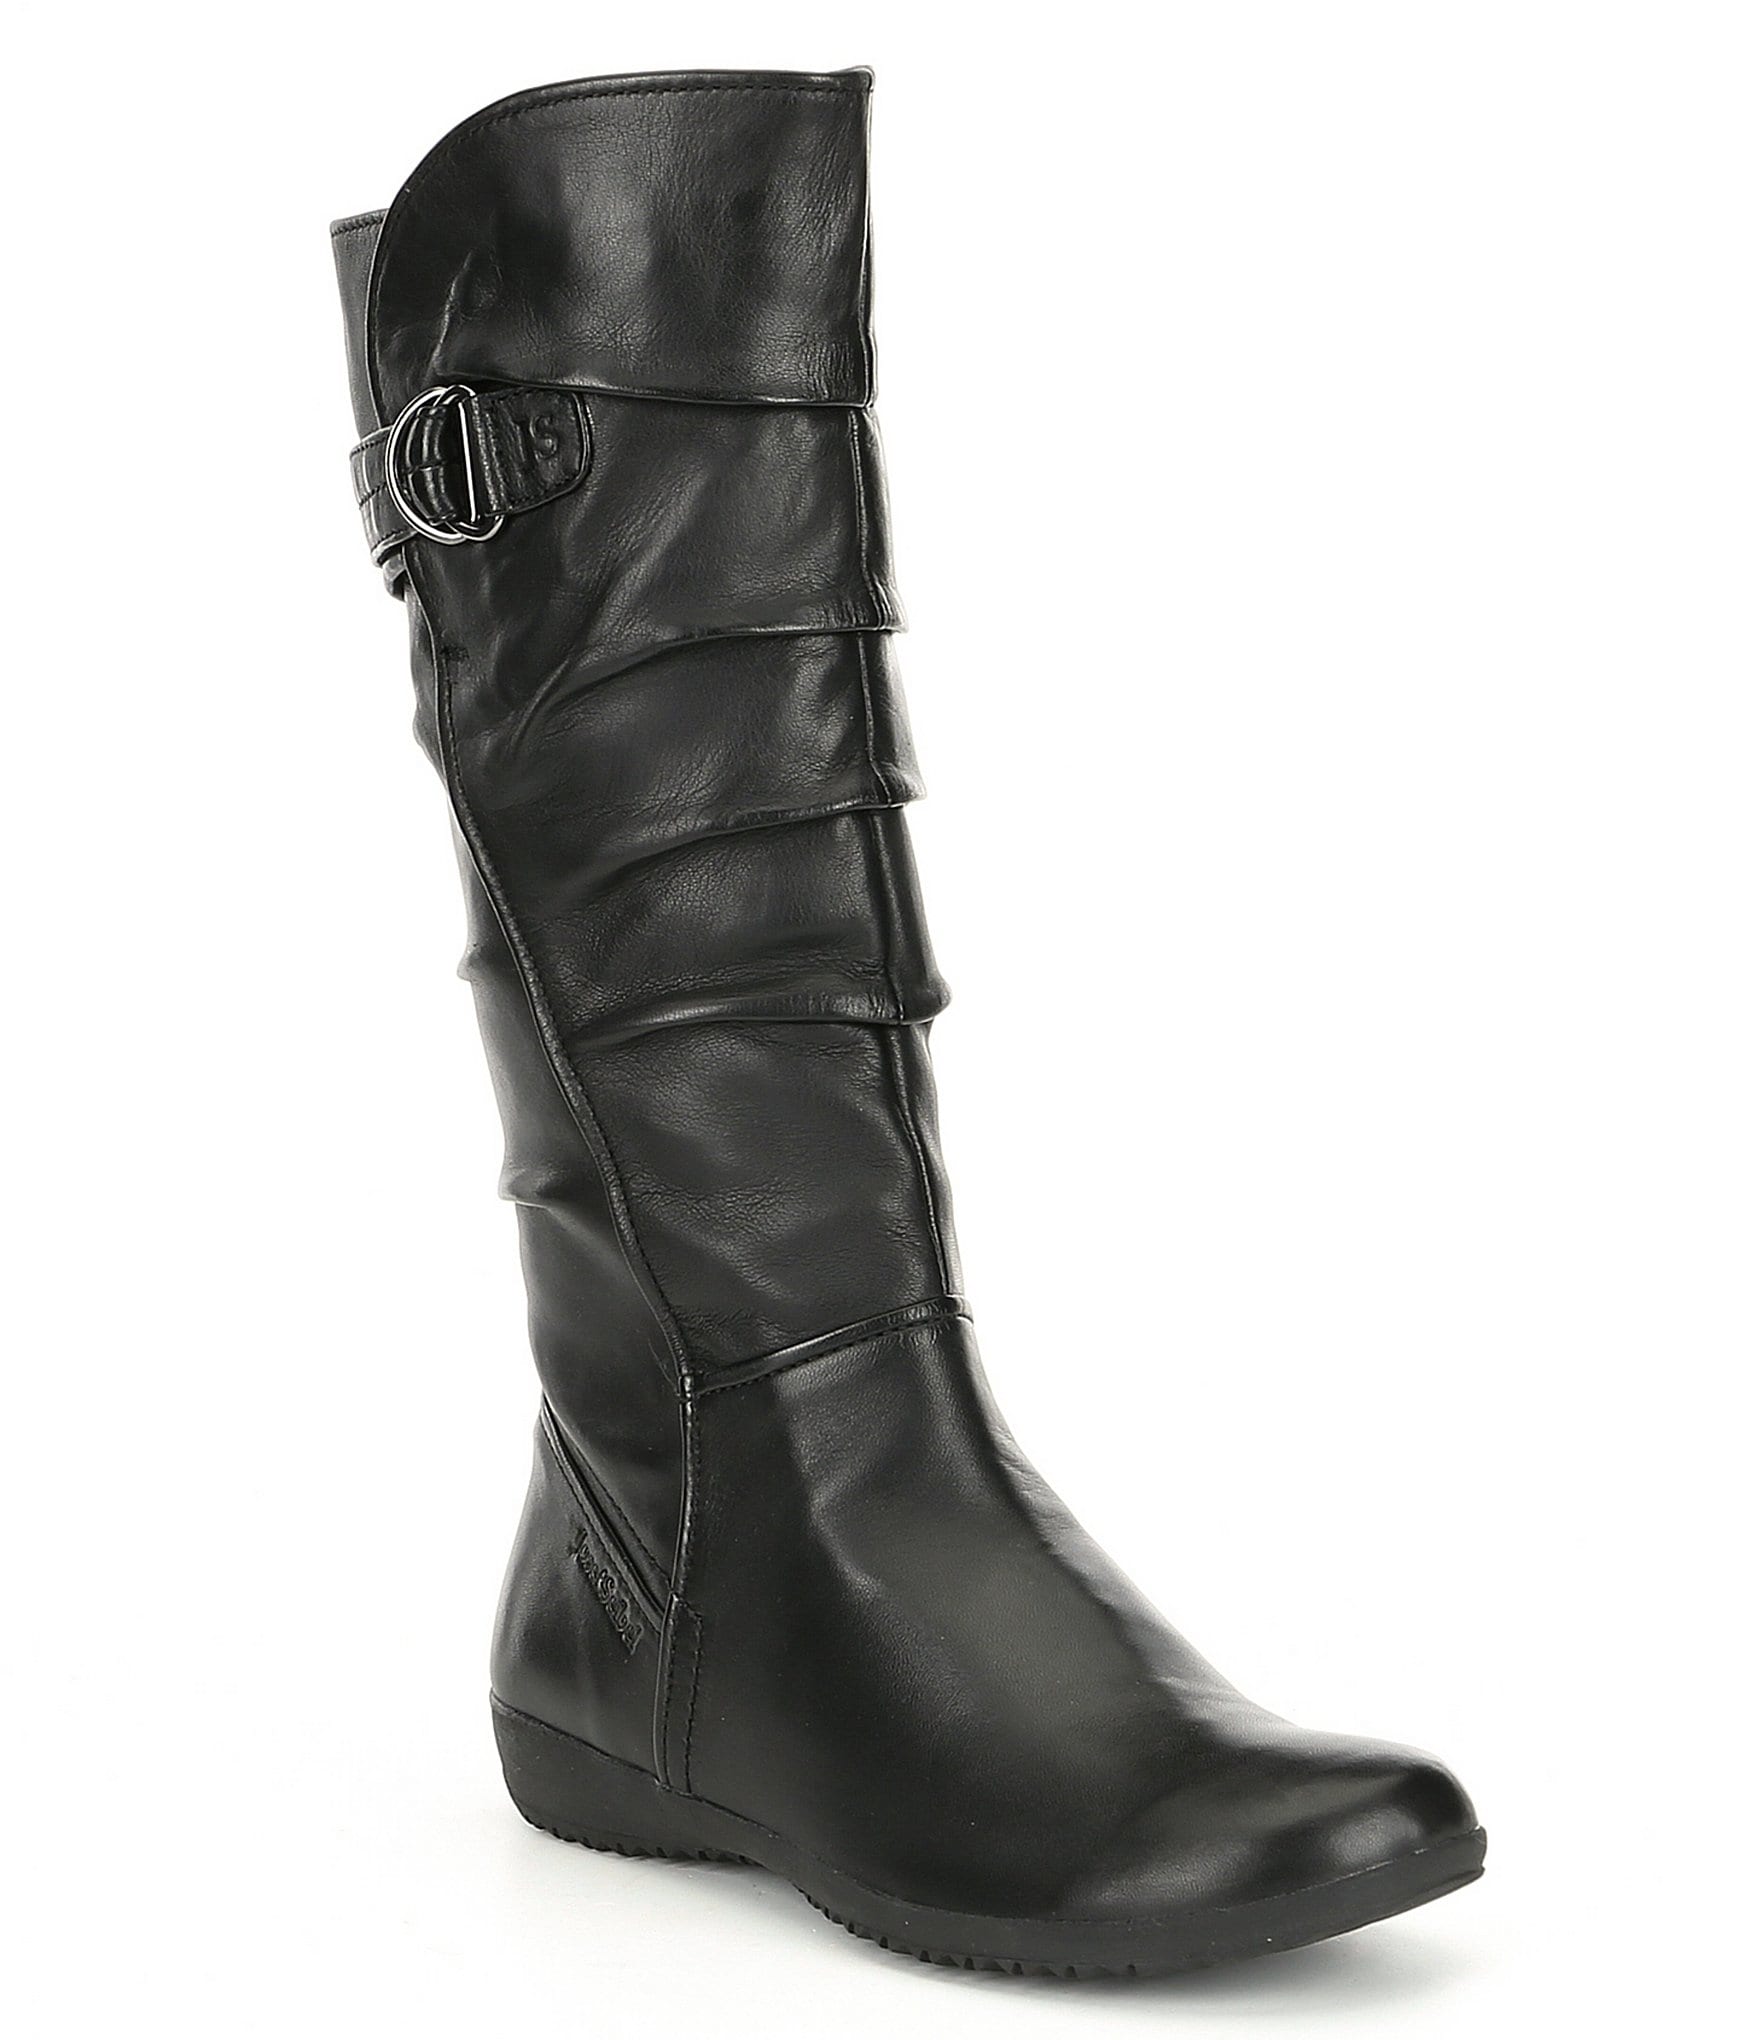 Josef Seibel Naly 23 Tall Scrunched Slouch Leather Boots | Dillard's